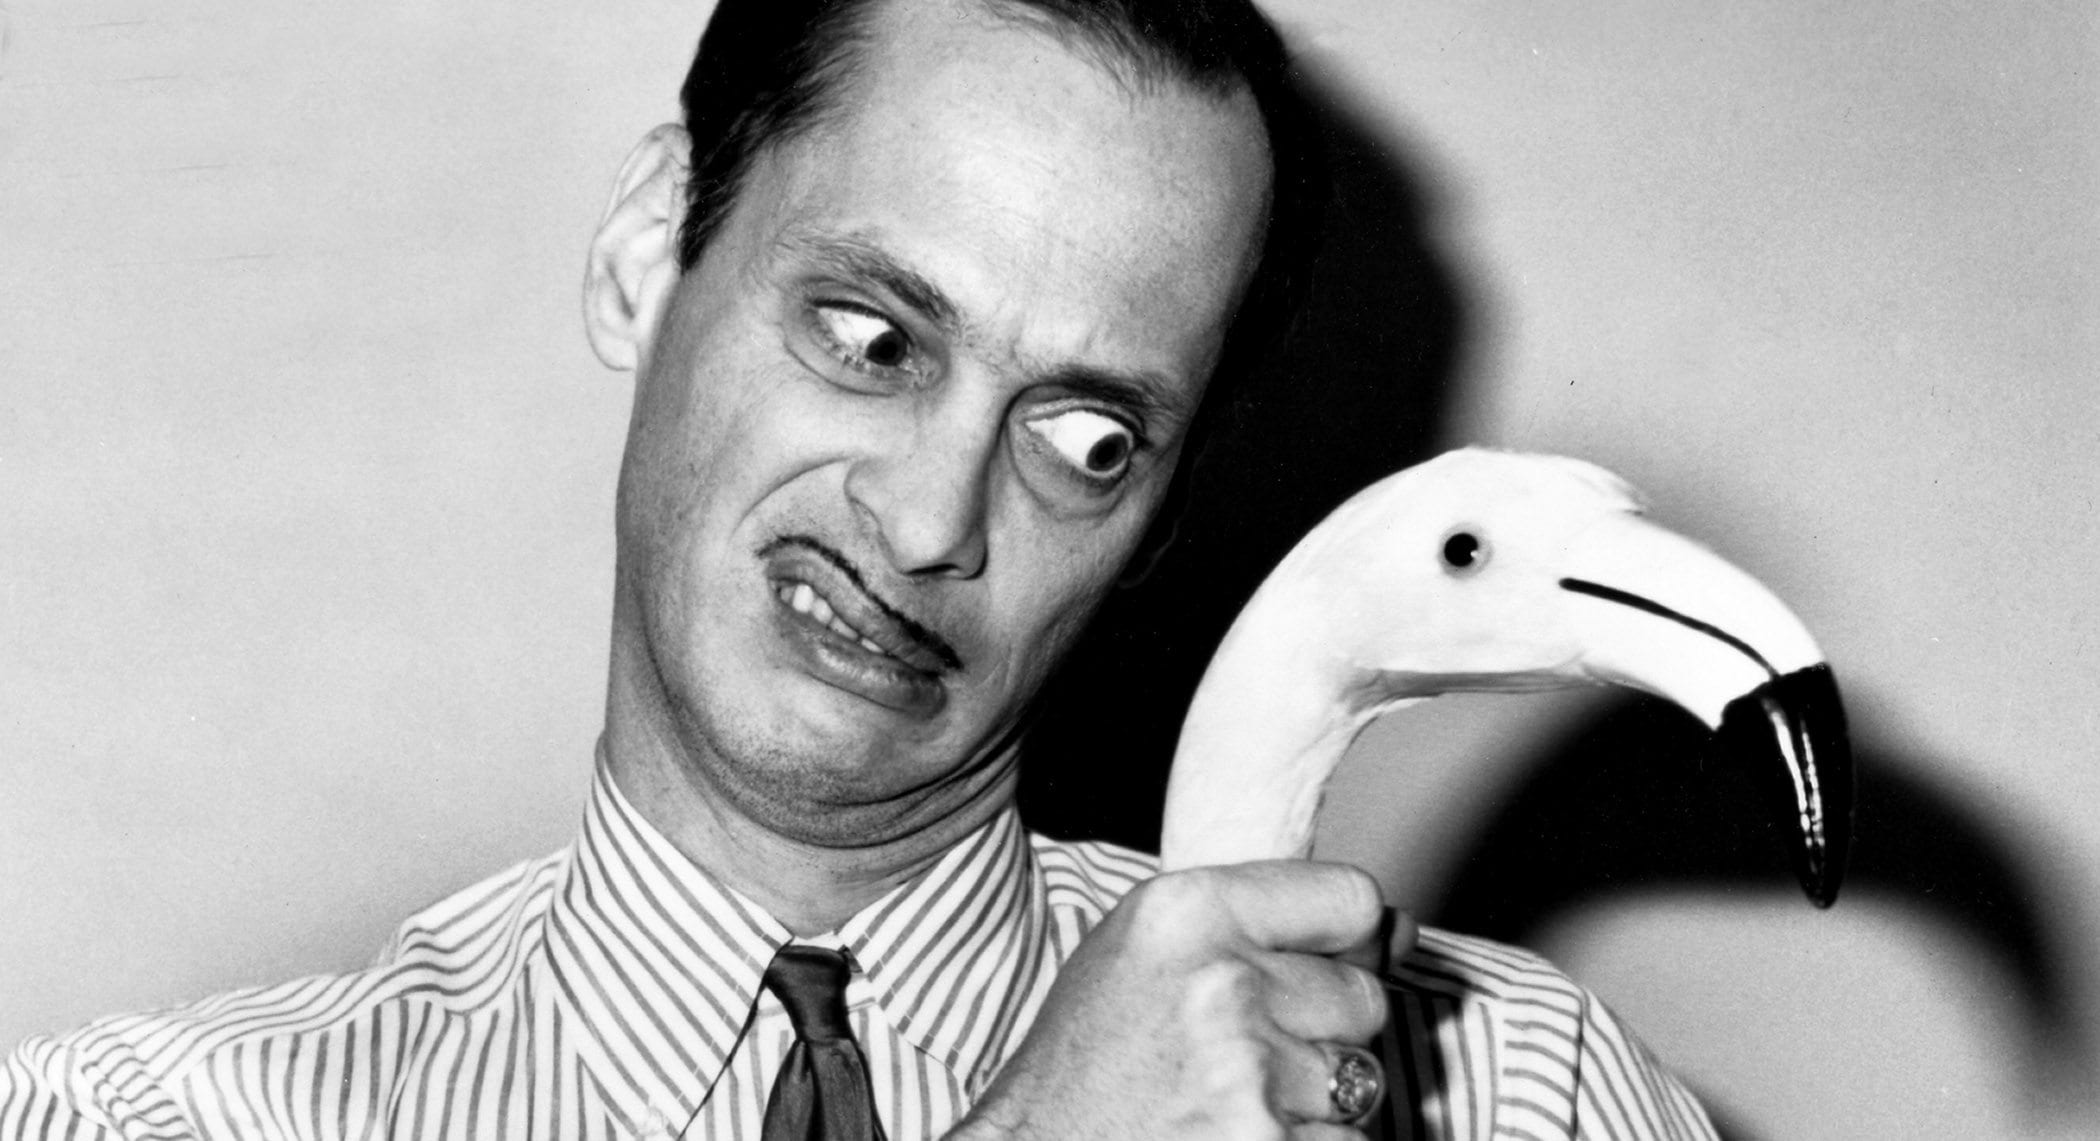 Here are ten key moments from John Waters’s career that illustrate his progression as a filmmaker, LGBTQI icon, and self-proclaimed “Pope of Trash”.